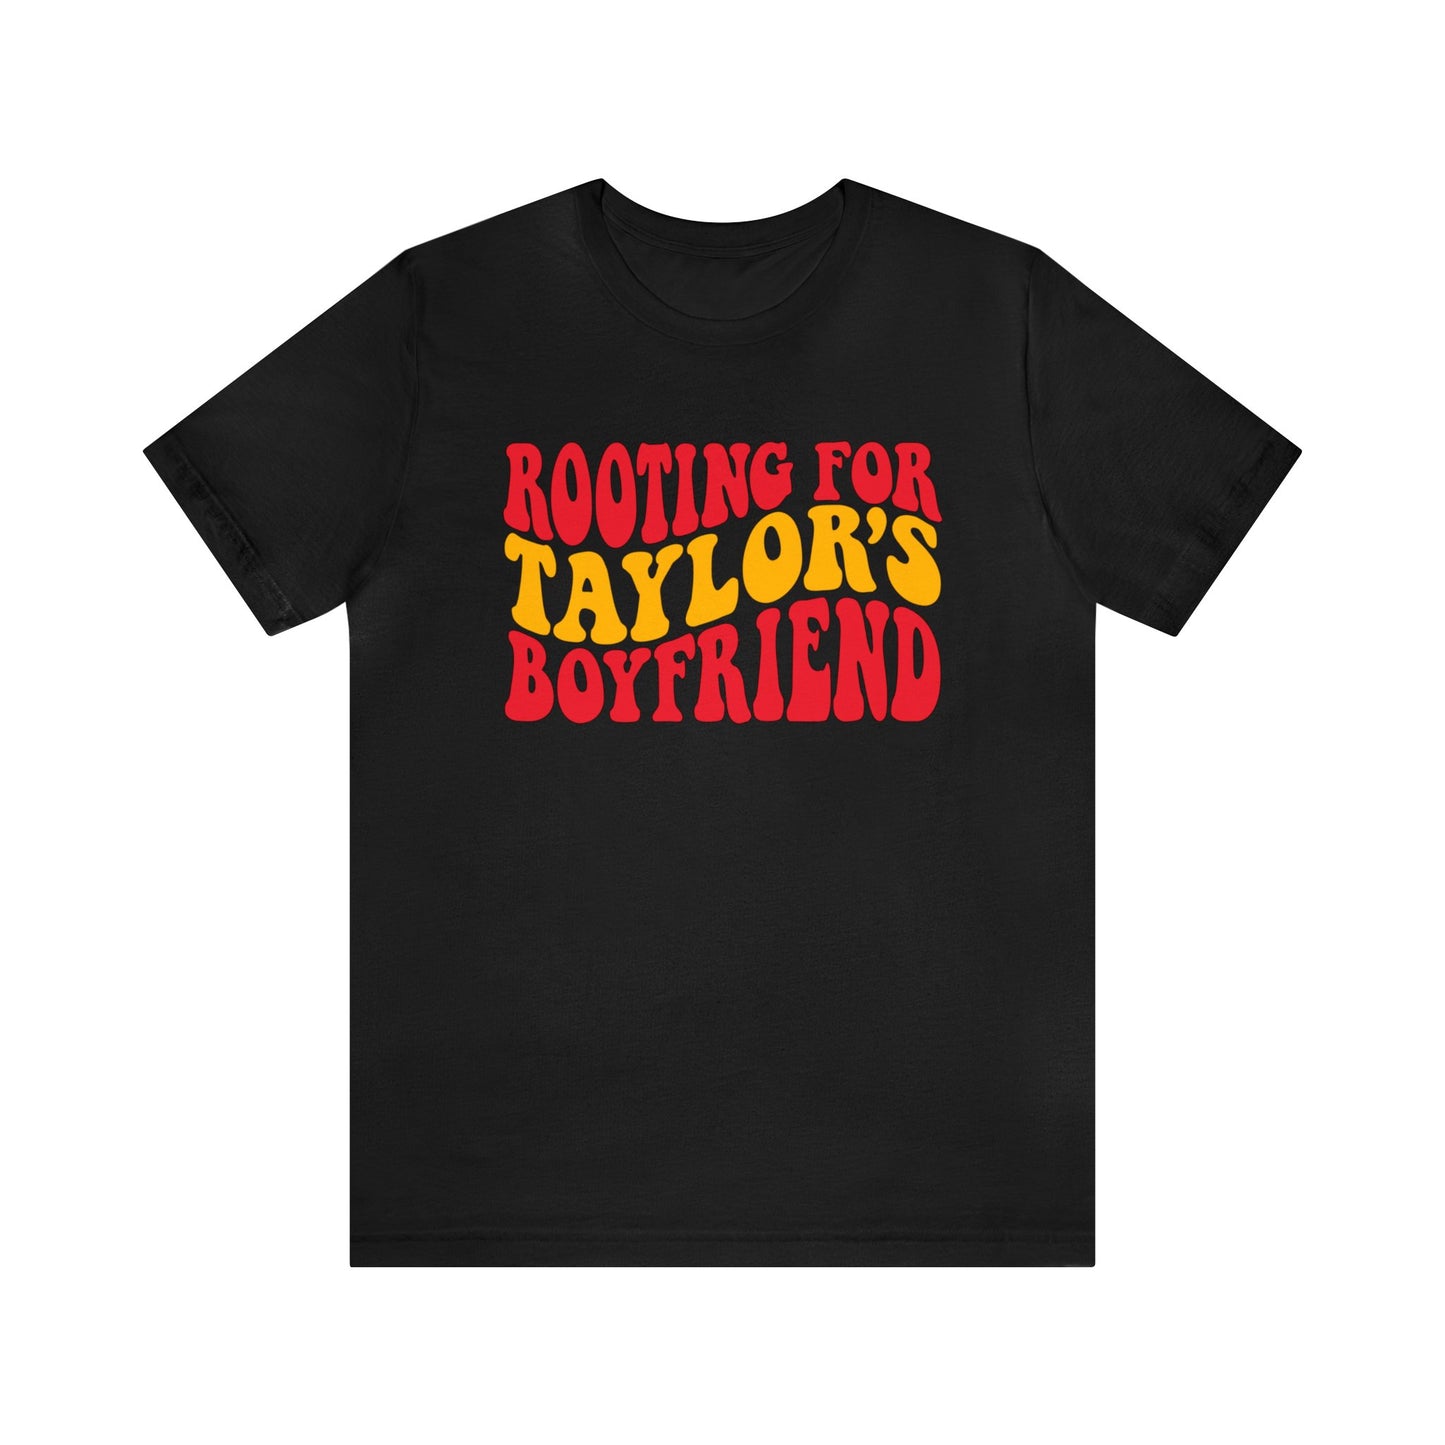 ROOTING FOR TAYLOR’S BOYFRIEND Unisex Bella+Canvas Jersey Short Sleeve Tee